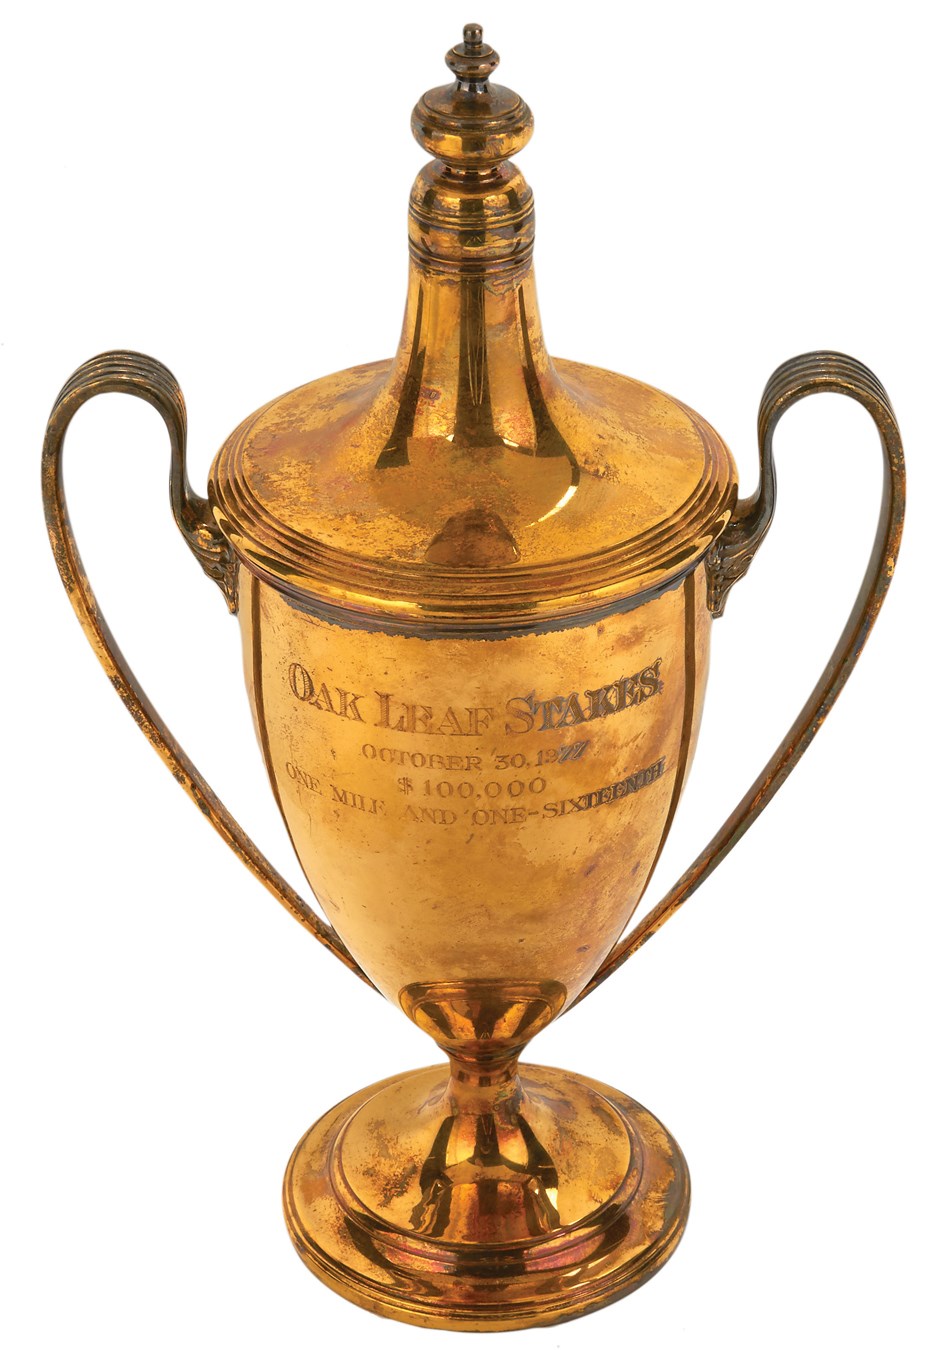 The Gotham Collection of Spectacular Horse Racing - "B. Thoughtful" 1977 Oak Leaf Stakes Silver Trophy w/Gold Wash by Tiffany